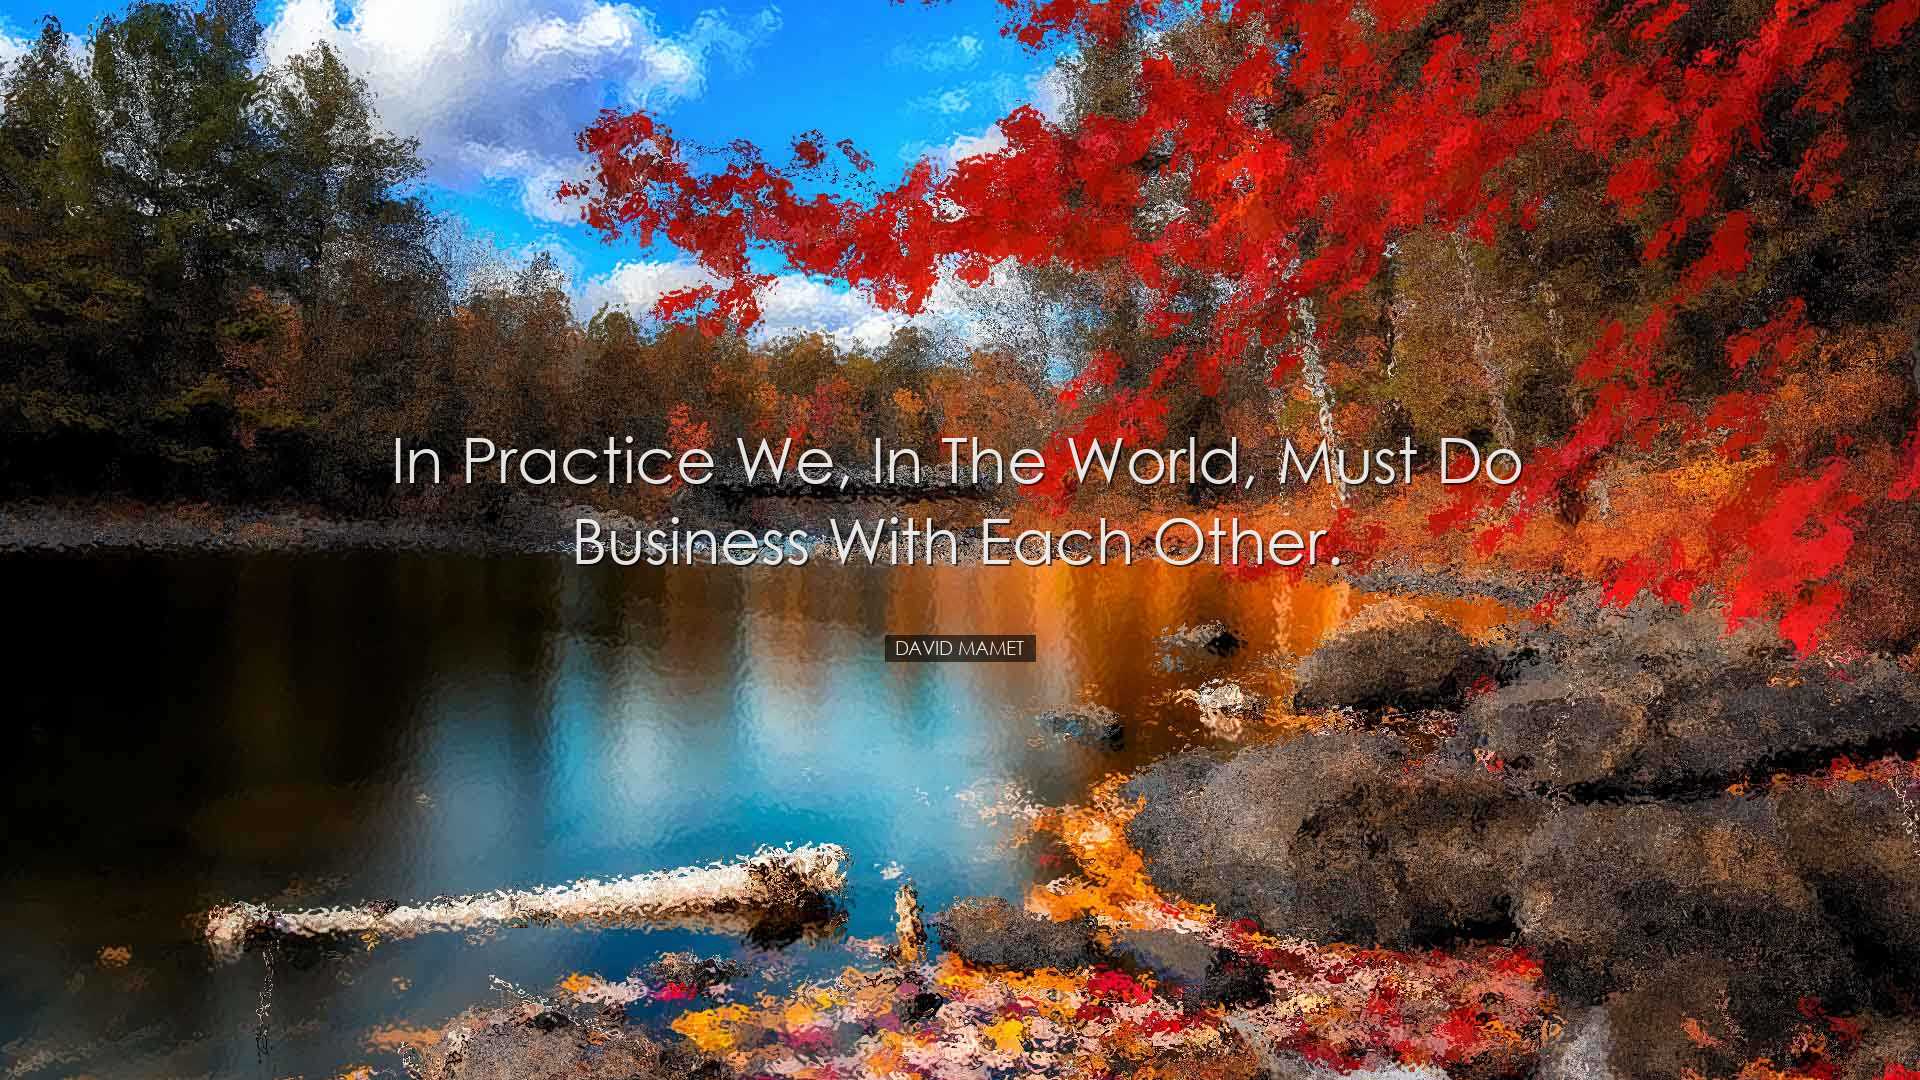 In practice we, in the world, must do business with each other. -